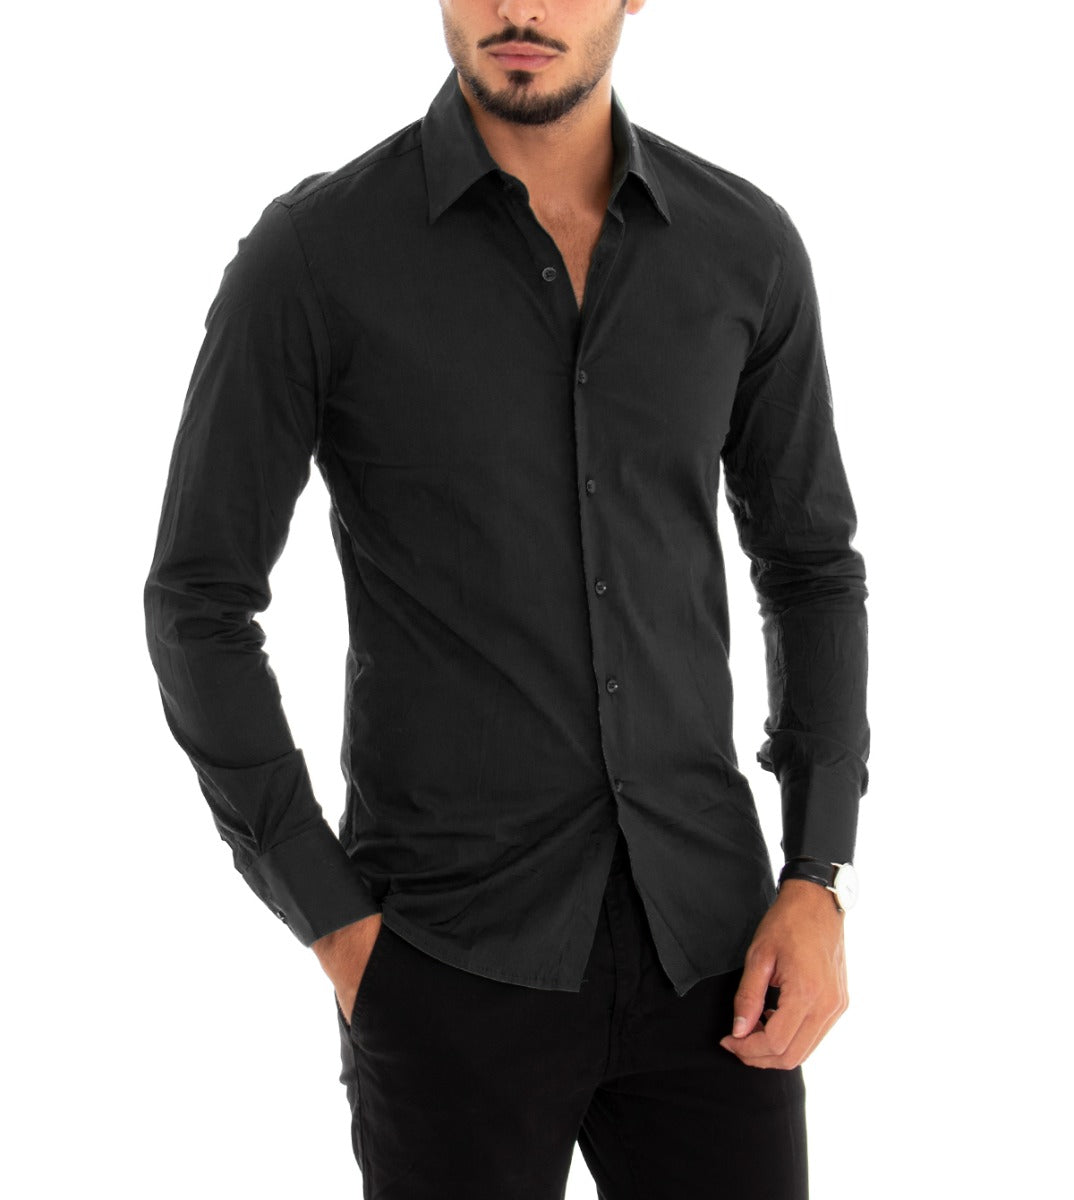 Men's Shirt With Collar Long Sleeve Slim Fit Basic Casual Black Cotton GIOSAL-C1810A